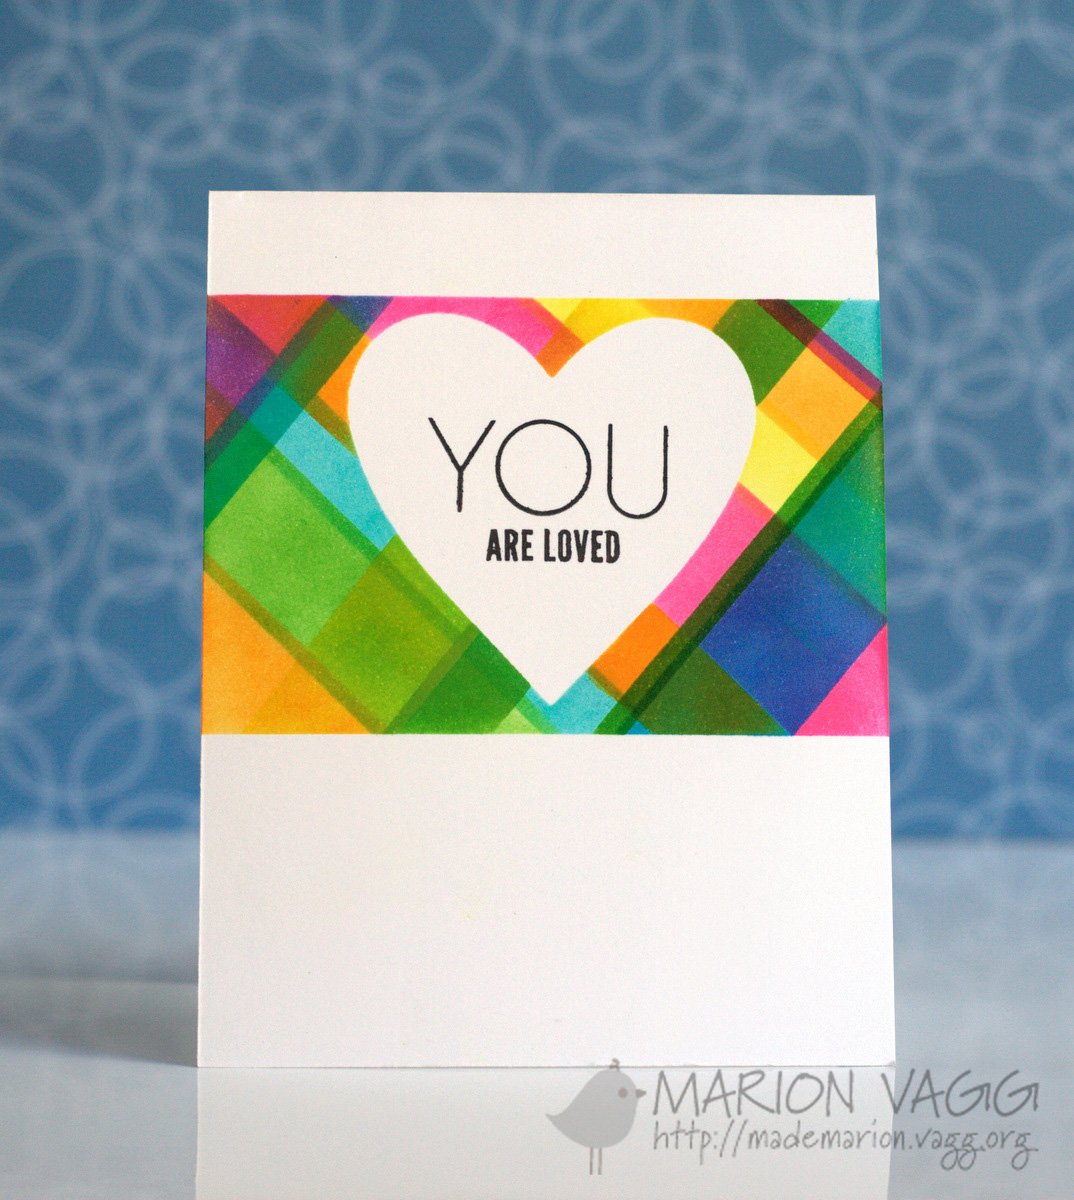 You are loved 2 | Marion Vagg